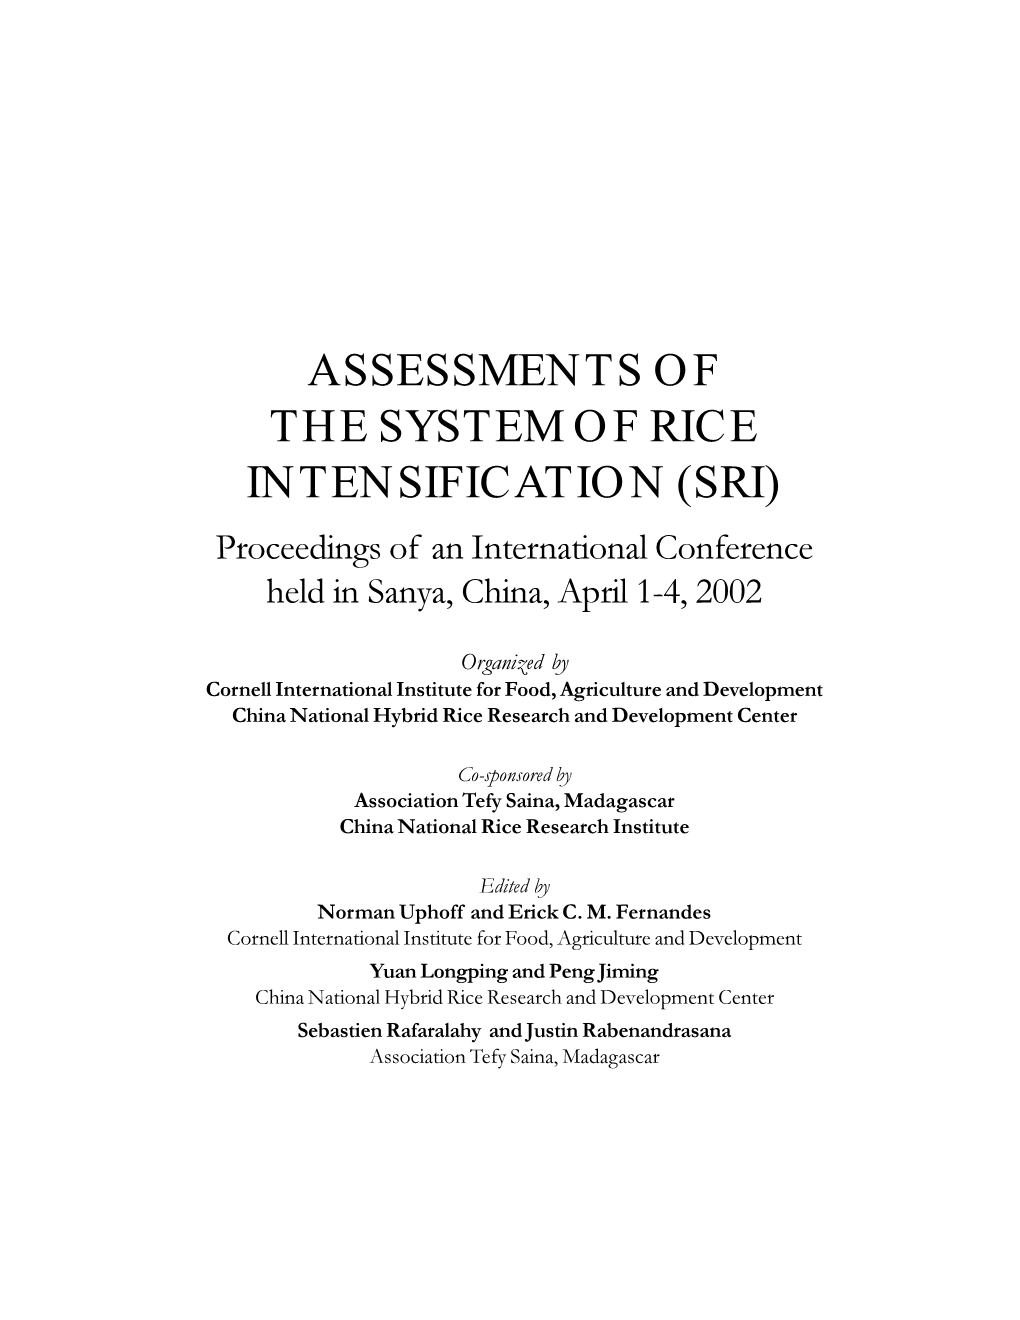 ASSESSMENTS of the SYSTEM of RICE INTENSIFICATION (SRI) Proceedings of an International Conference Held in Sanya, China, April 1-4, 2002